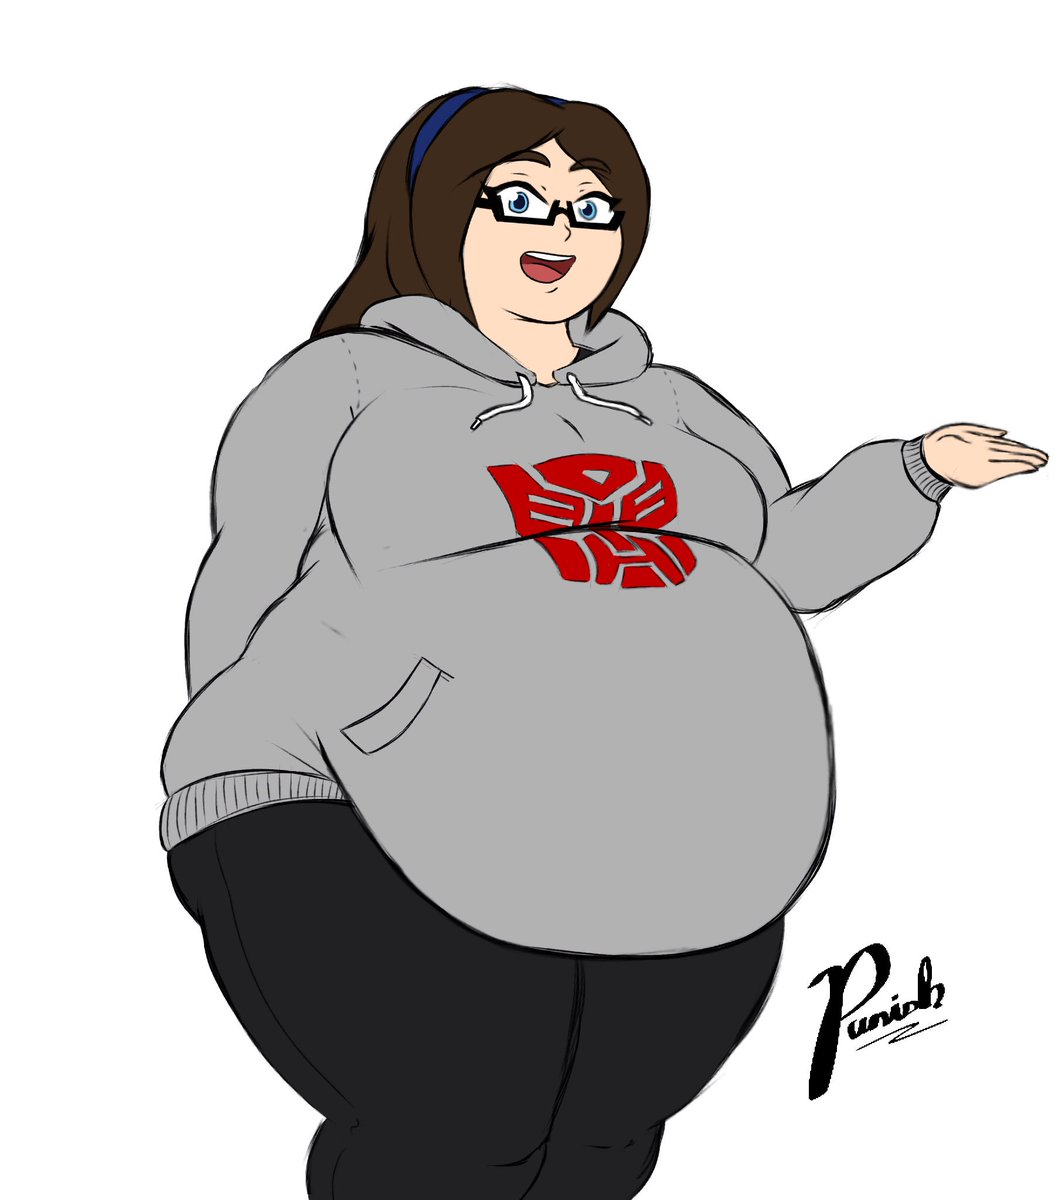 Stephanie Is Terrified of The T-Pose Meme by Limewire15 on DeviantArt